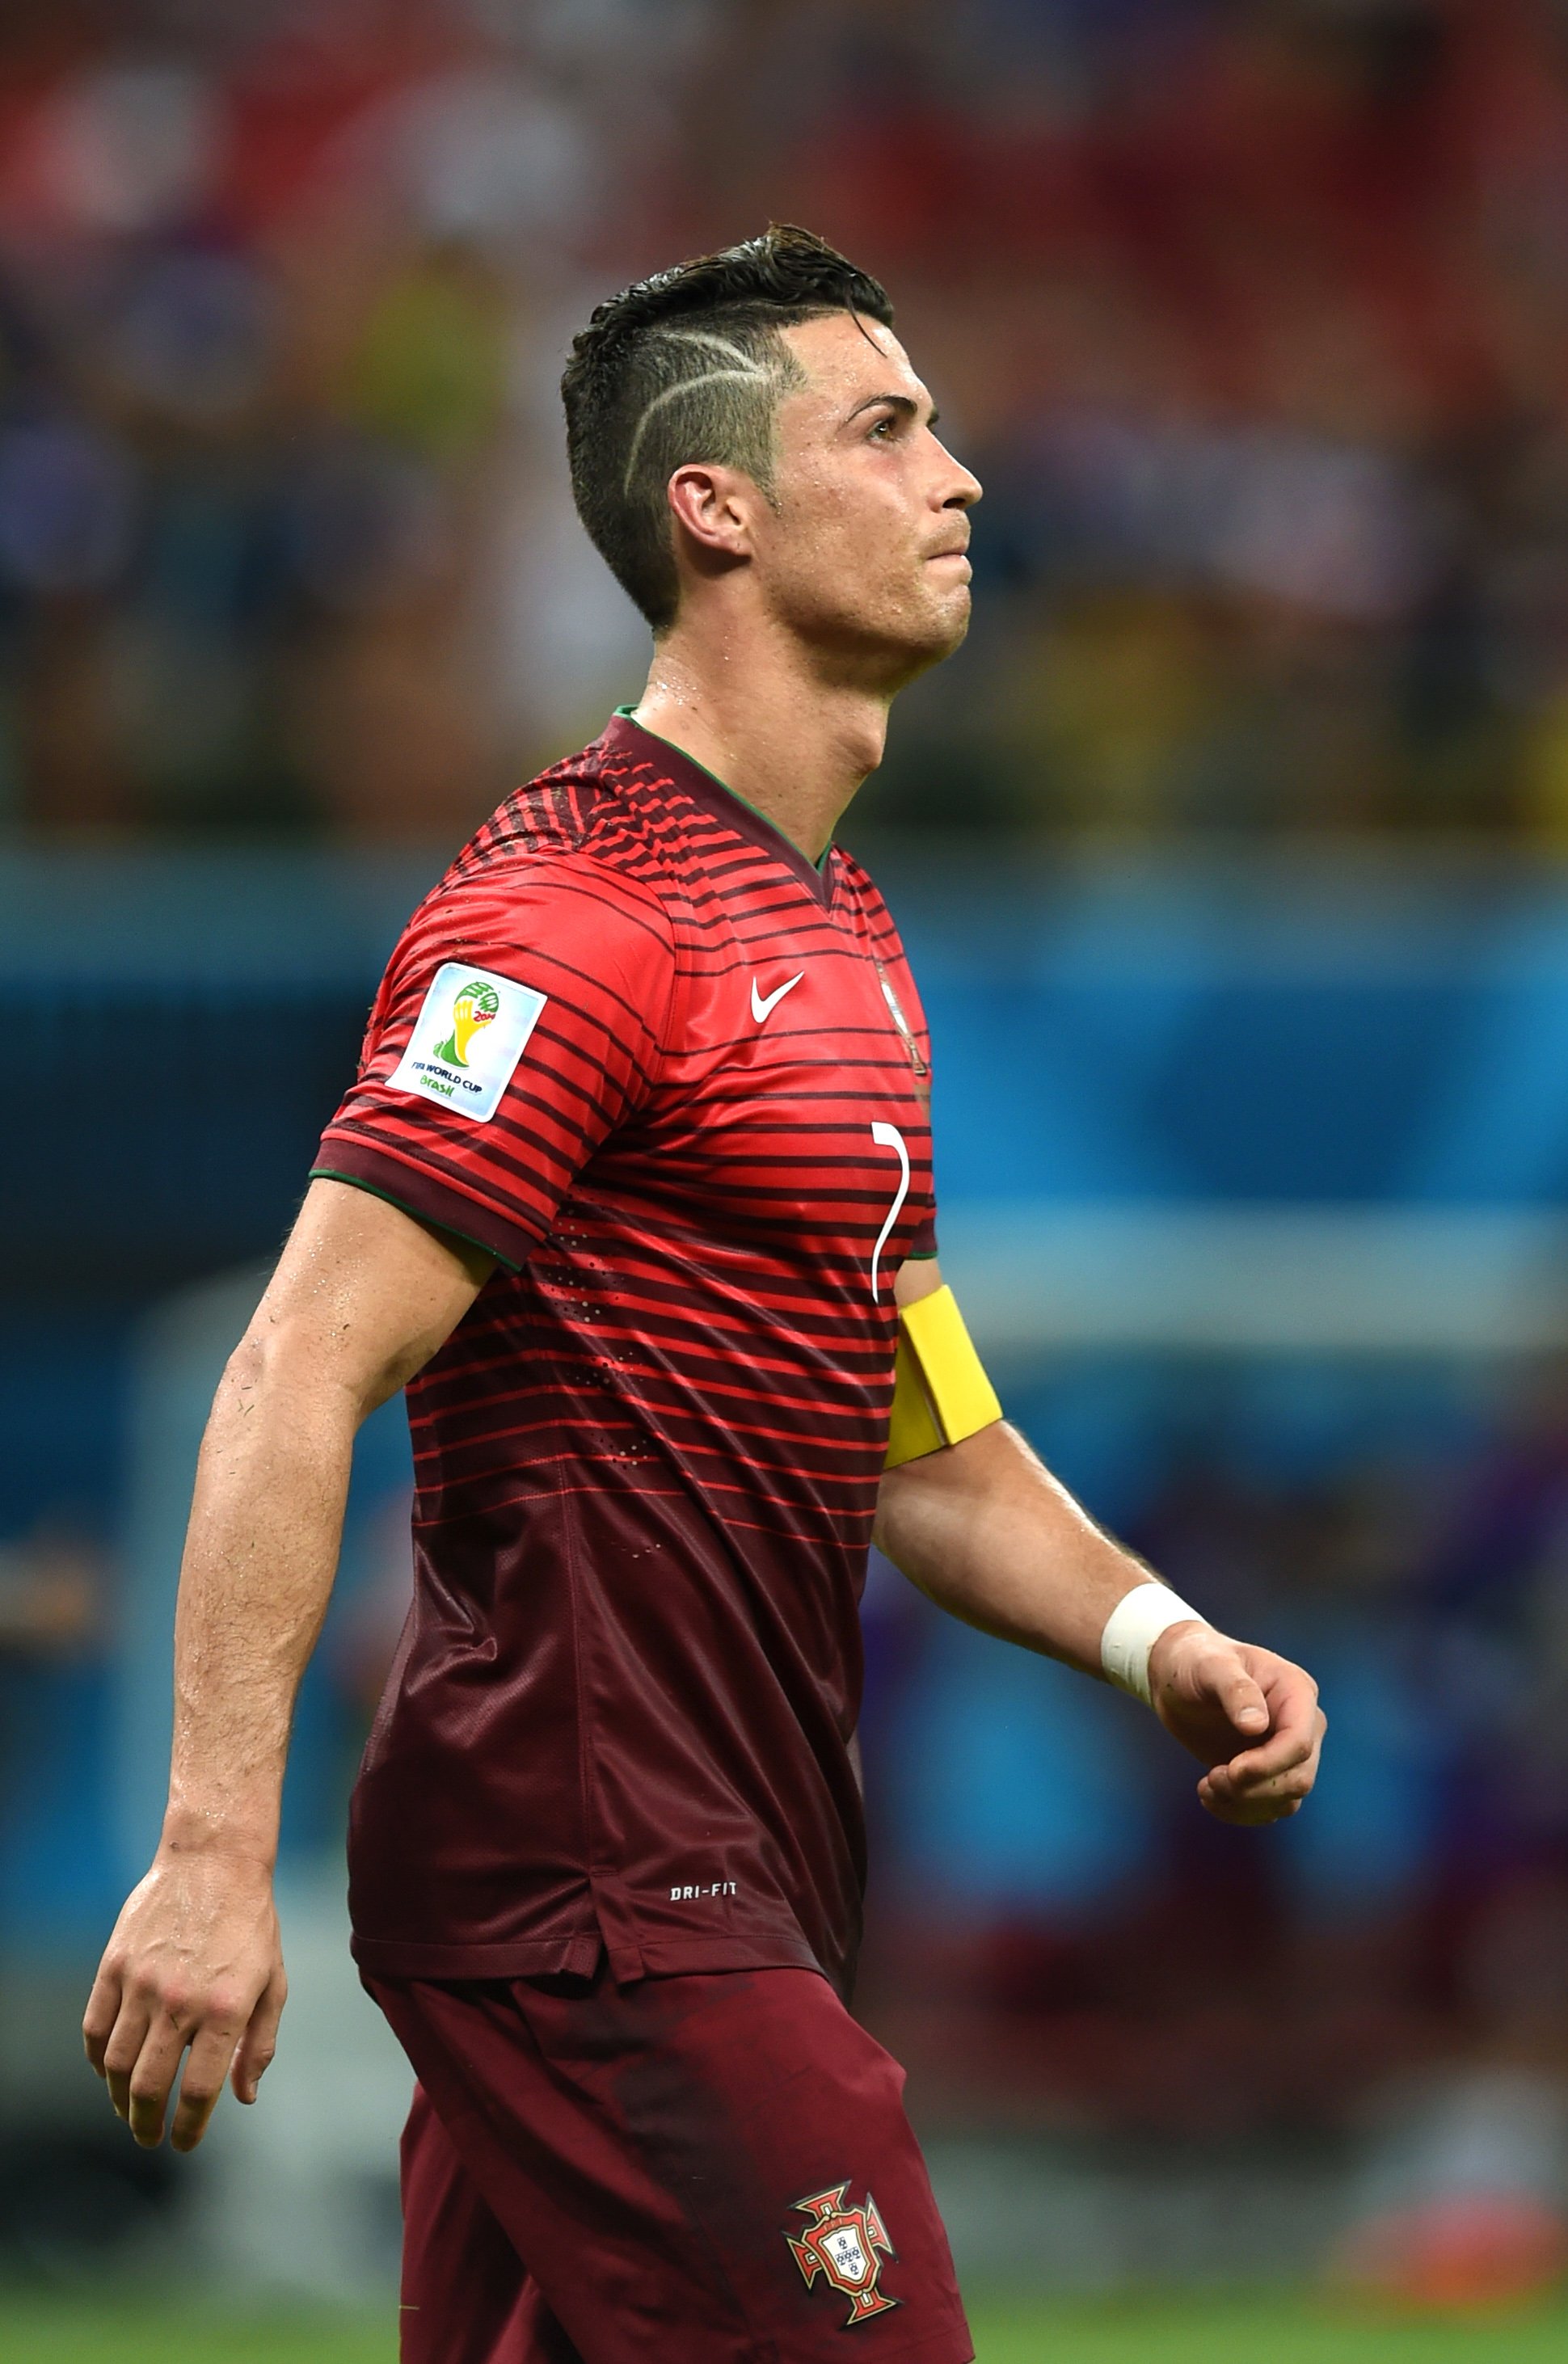 Portugal's Cristiano Ronaldo walks on the pitch during the match between the USA and Portugal at the Arena da Amazonia in Manaus, Brazil on June 22, 2014.